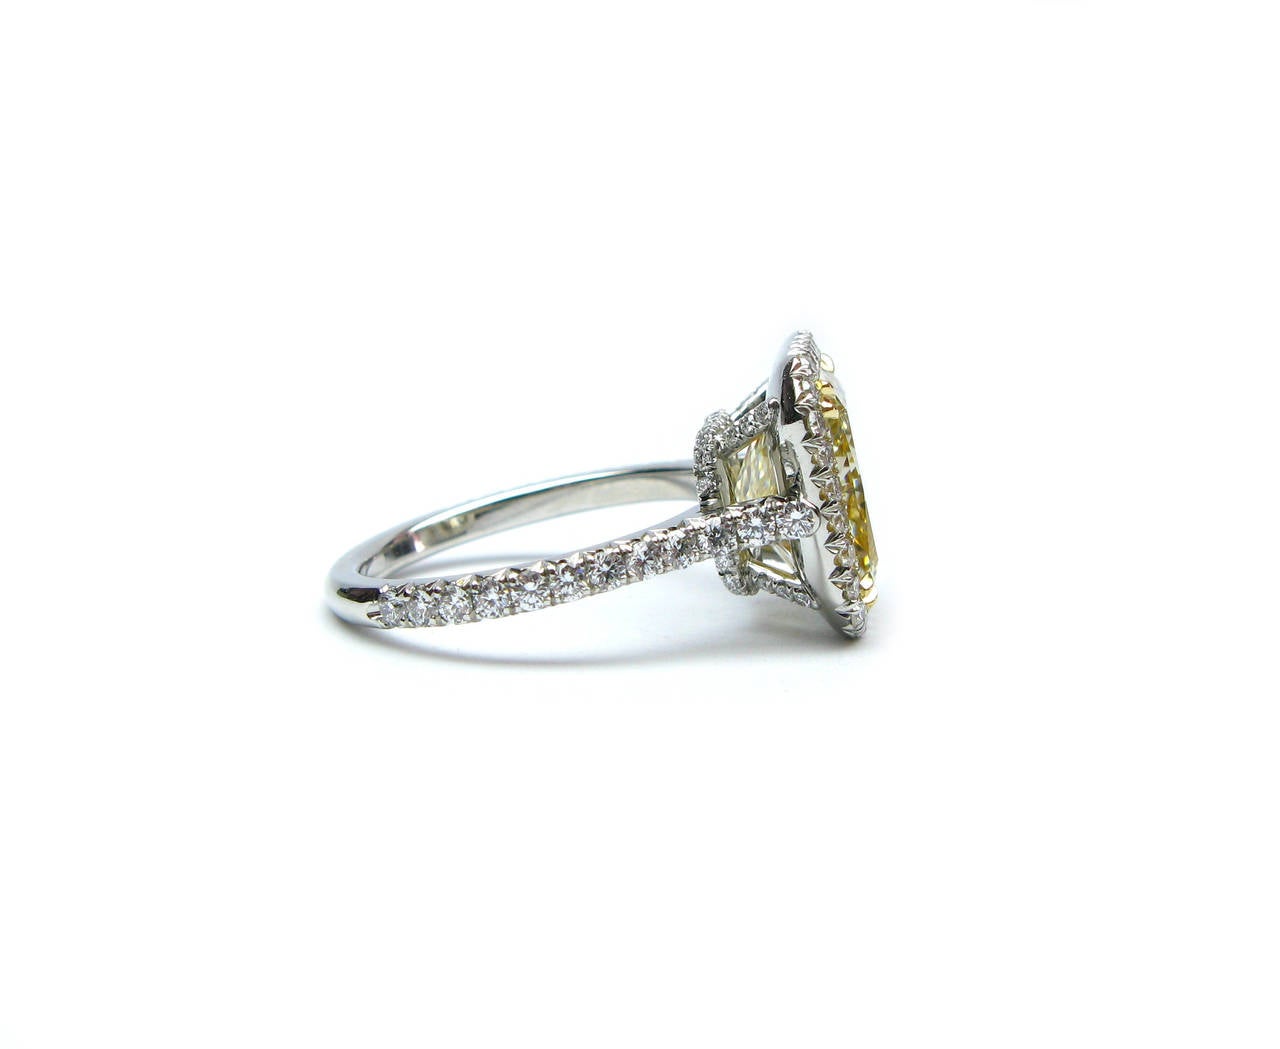 This exquisite GIA certified 5.38Ct fancy light yellow, Si1 clarity radiant cut diamond ring is set in a stunning platinum and 18Kt gold pave frame that extends half way down the band of the ring. The fancy color of the diamond with the modern pave